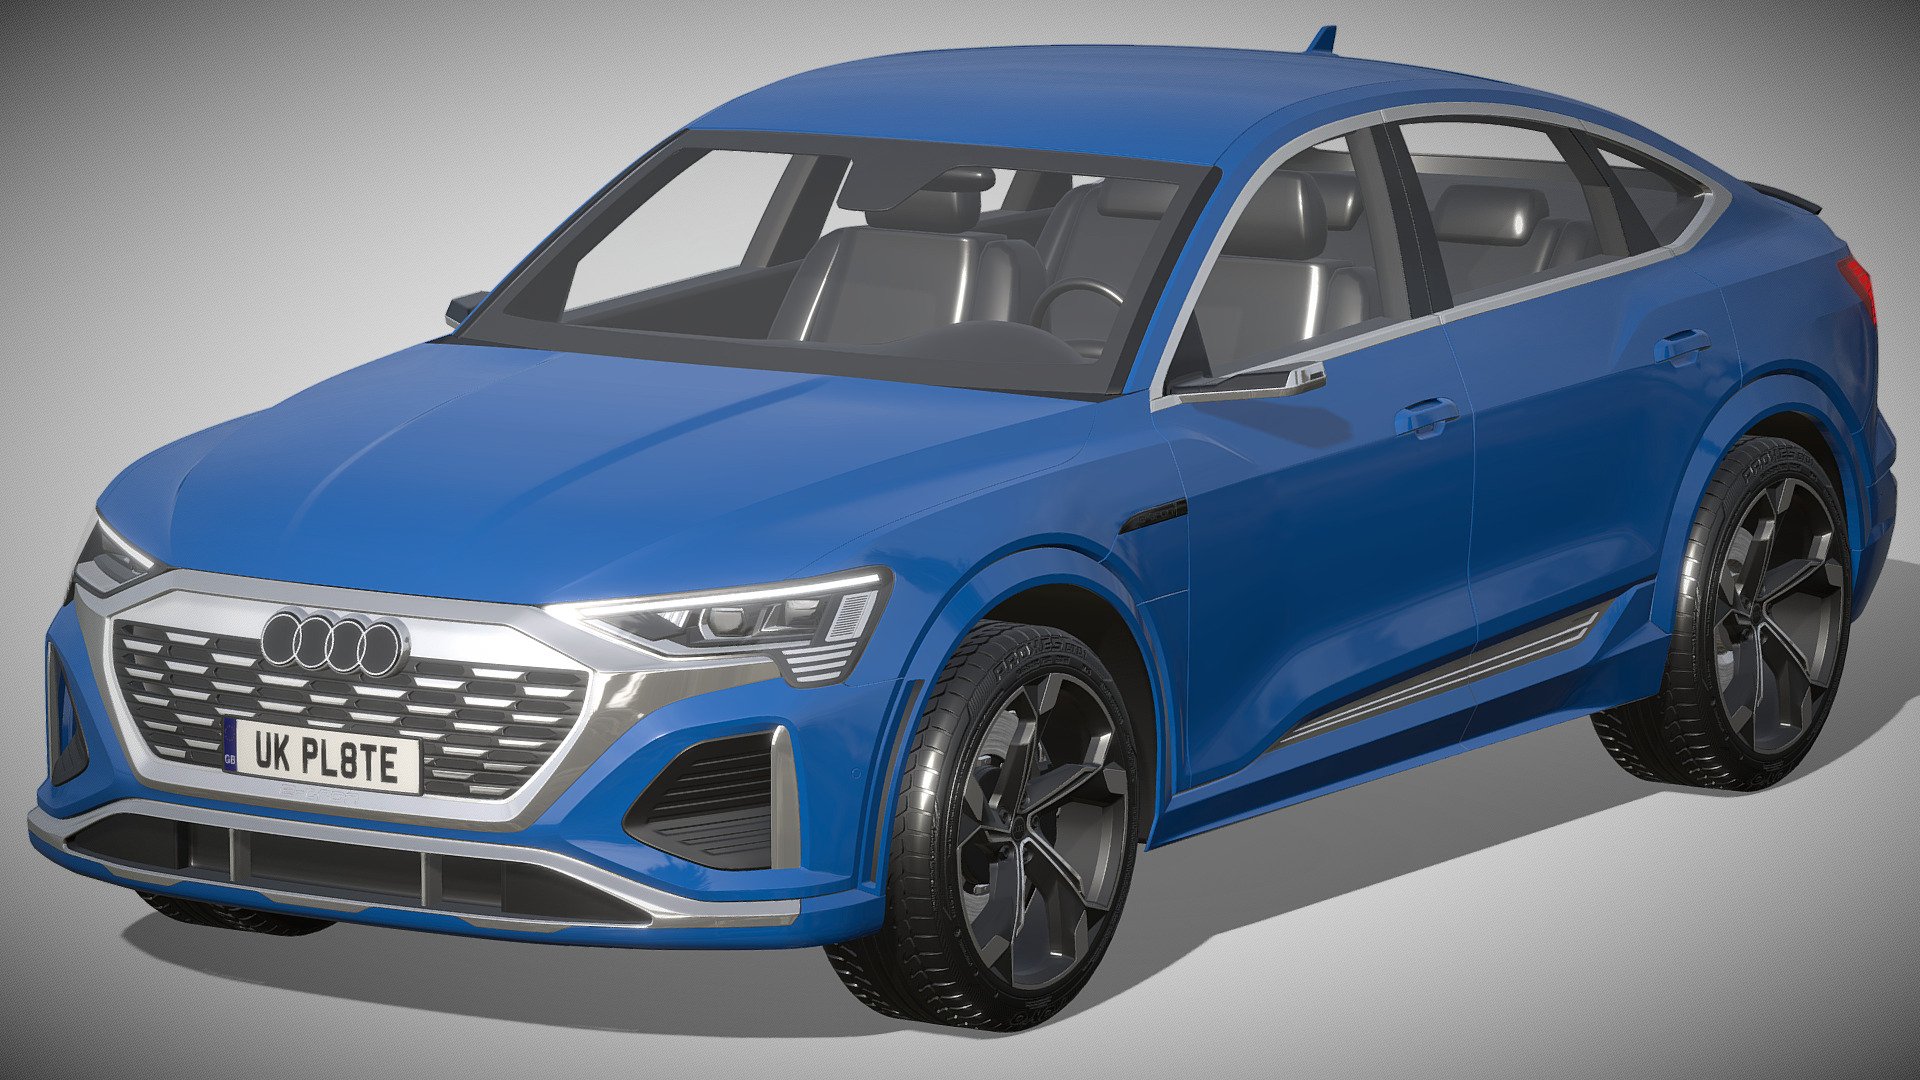 Audi SQ8 Sportback e-tron

https://www.audi.de/de/brand/de/neuwagen/q8-e-tron/sq8-sportback-e-tron.html

Clean geometry Light weight model, yet completely detailed for HI-Res renders. Use for movies, Advertisements or games

Corona render and materials

All textures include in *.rar files

Lighting setup is not included in the file! - Audi SQ8 Sportback e-tron - Buy Royalty Free 3D model by zifir3d 3d model